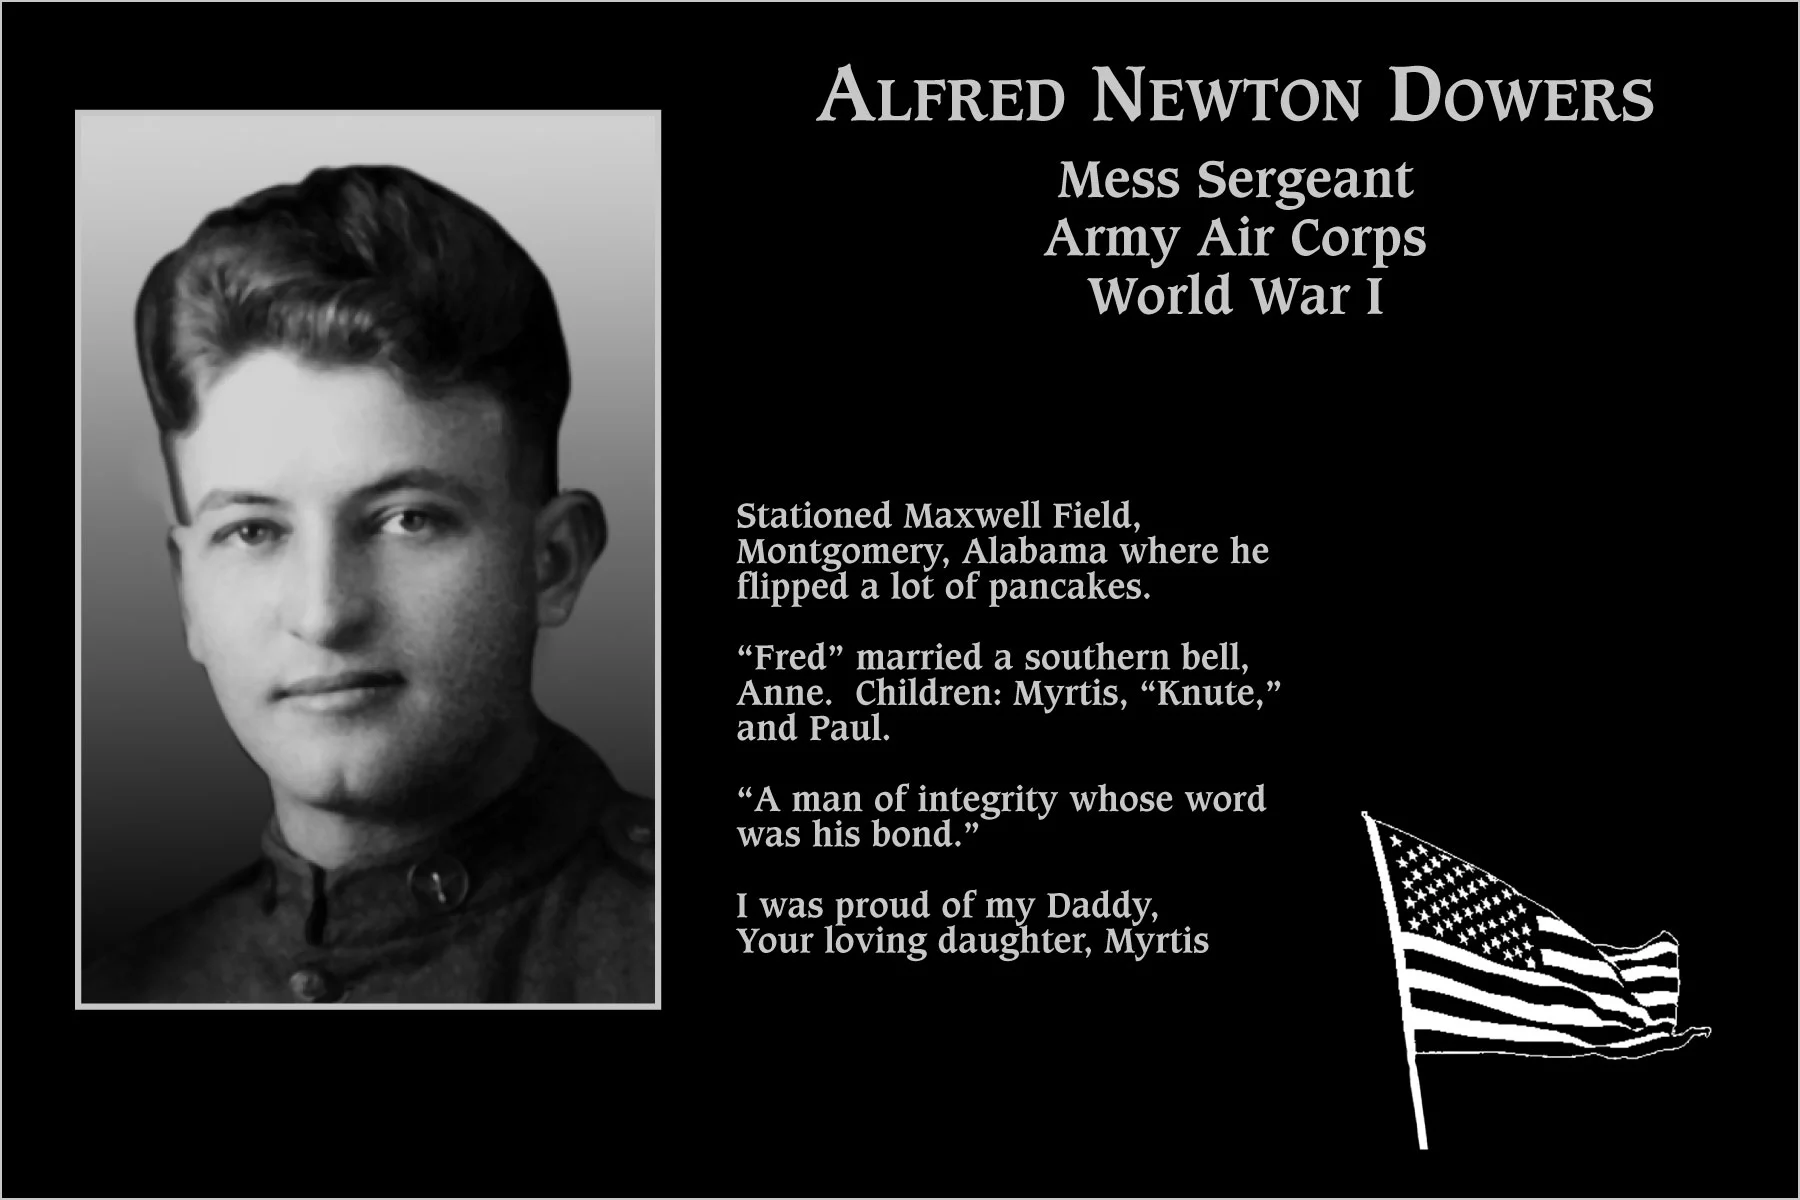 Alfred Newton Dowers